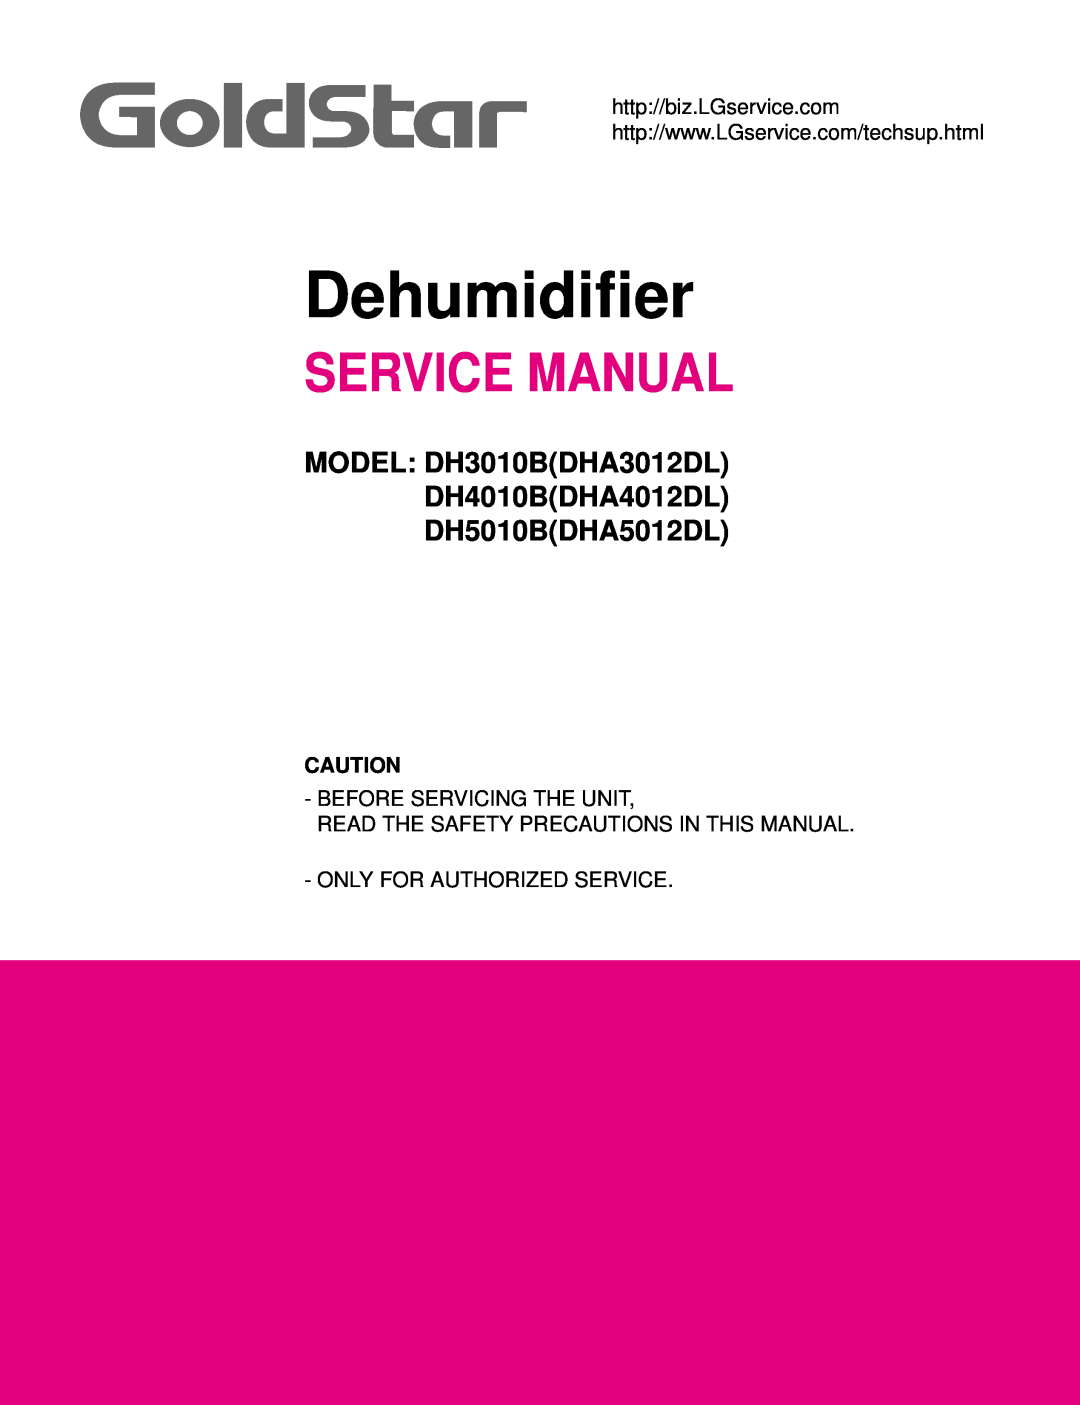 Goldstar DHA5012DL service manual Before Servicing The Unit, Read The Safety Precautions In This Manual, Dehumidifier 